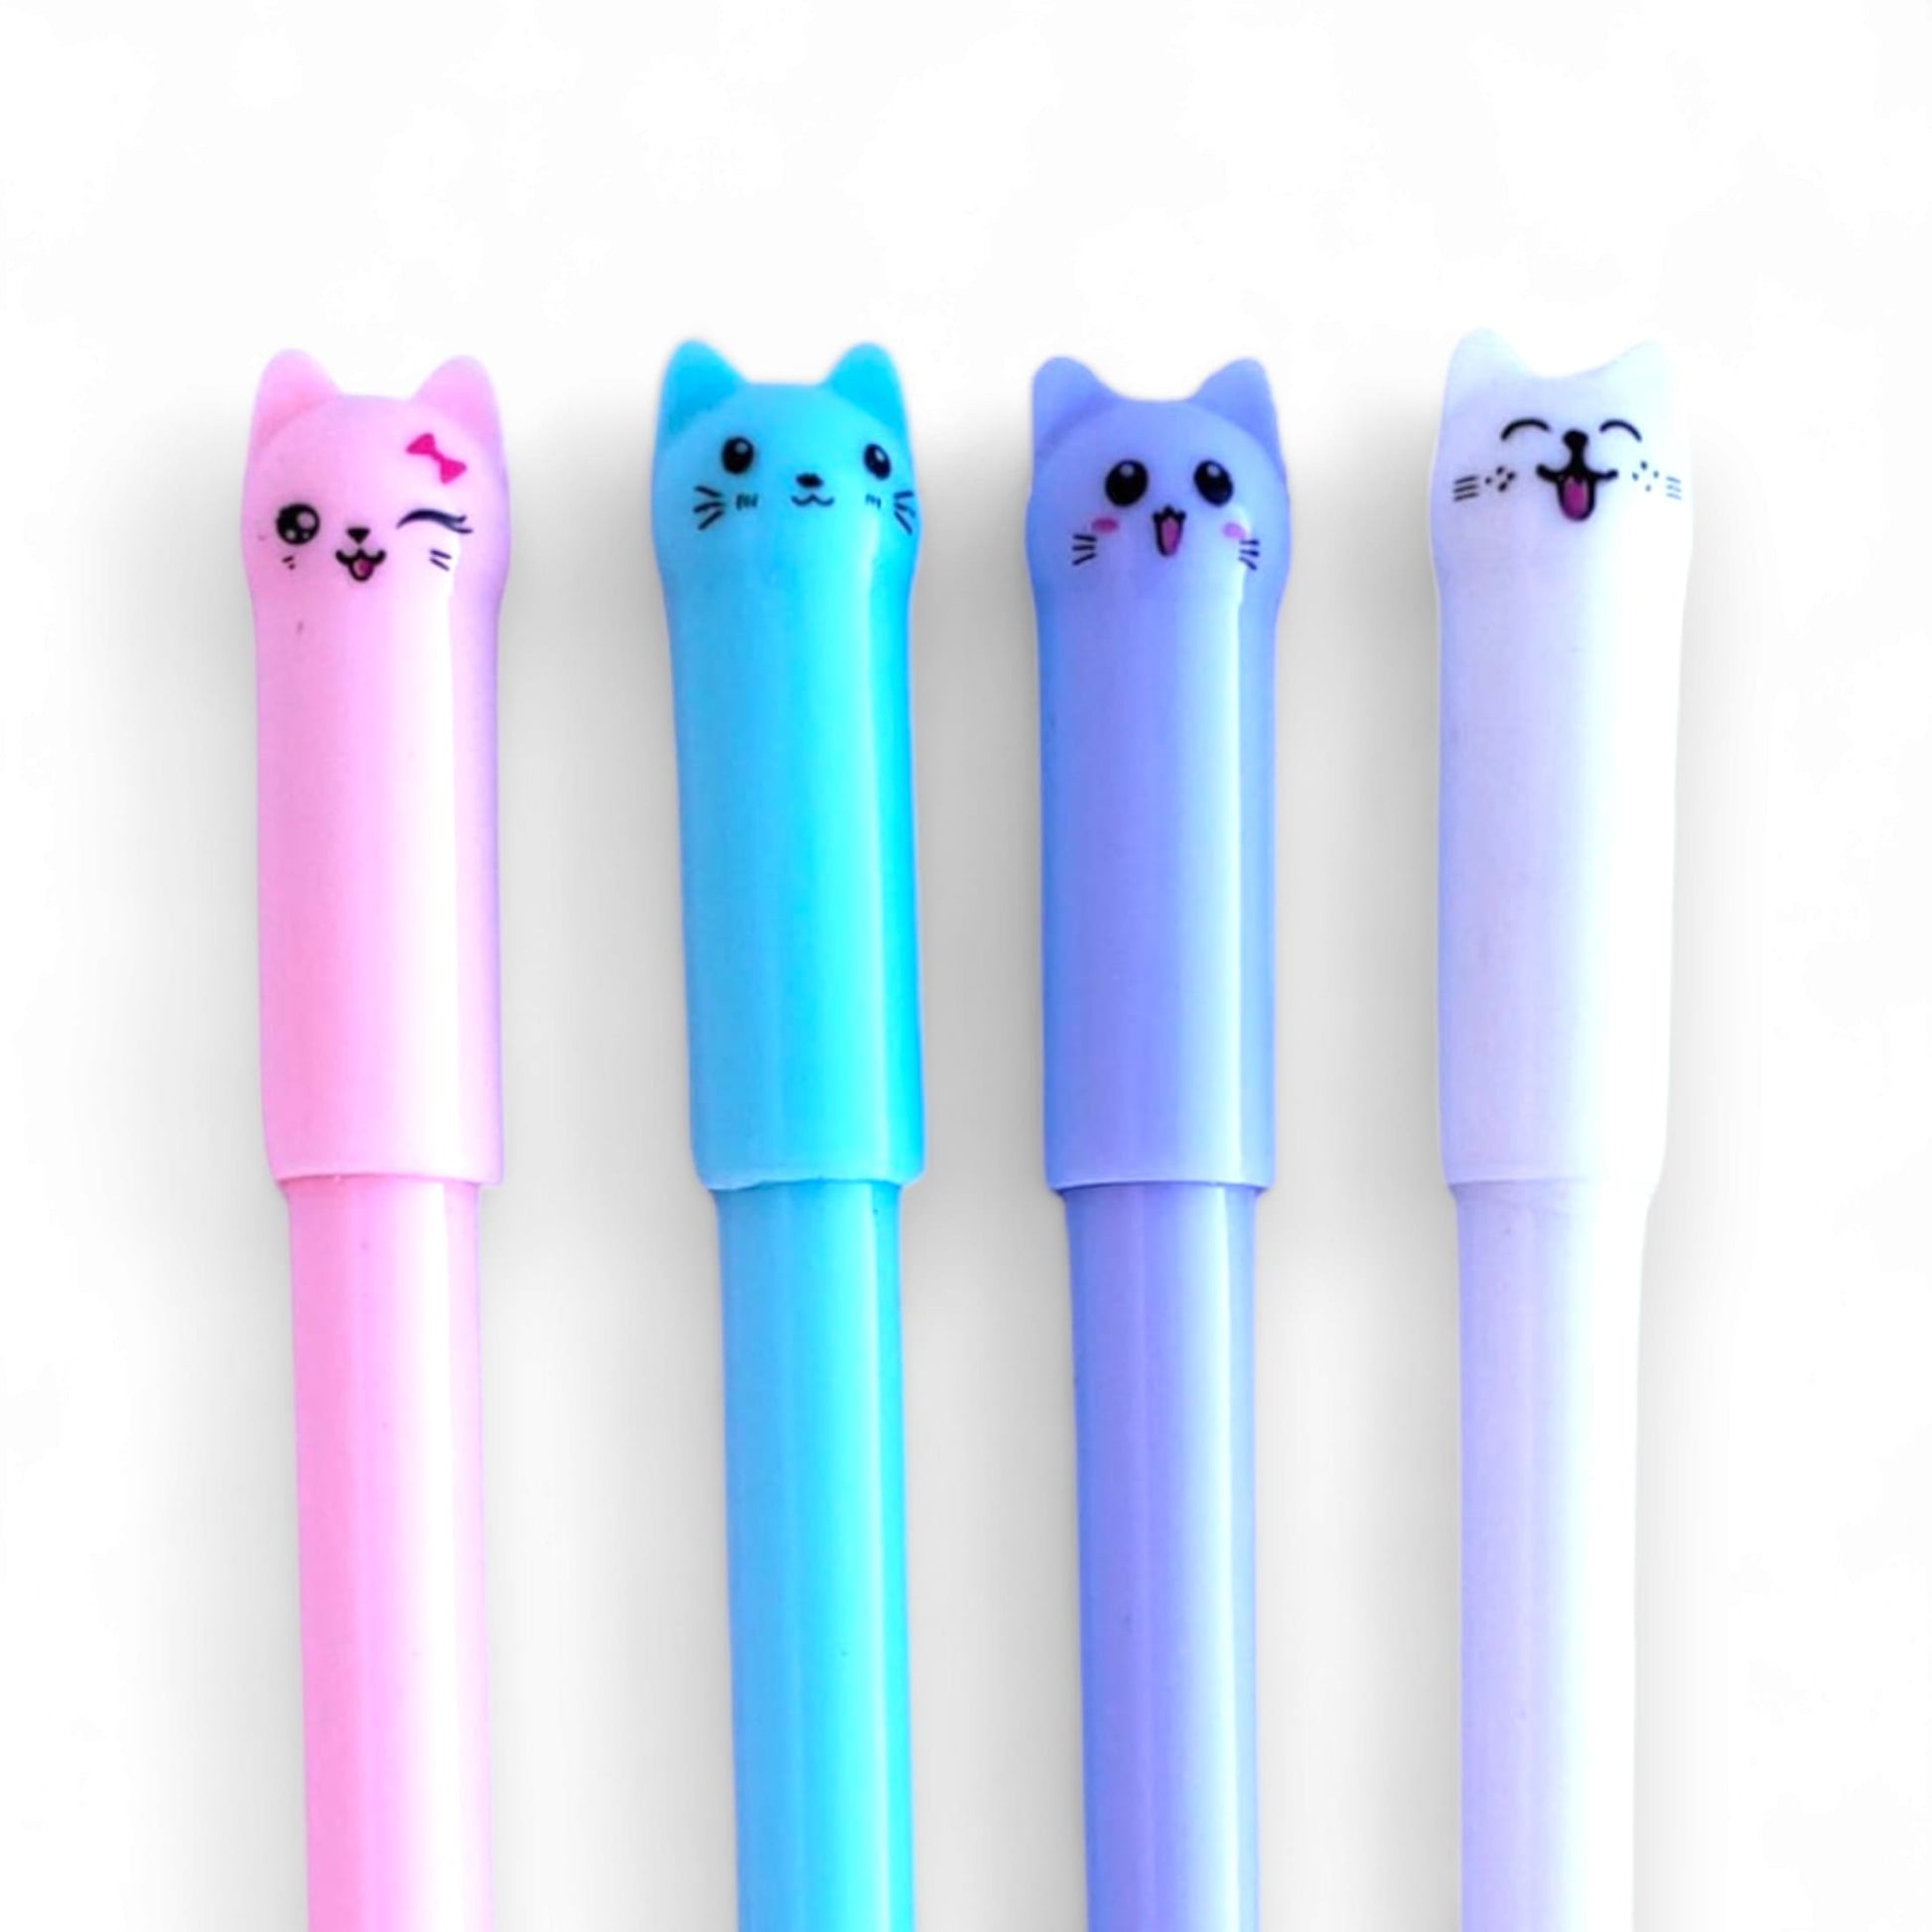 Colorful Kitty Gel Pen Set of 4 from Confetti Kitty, Only 4.99